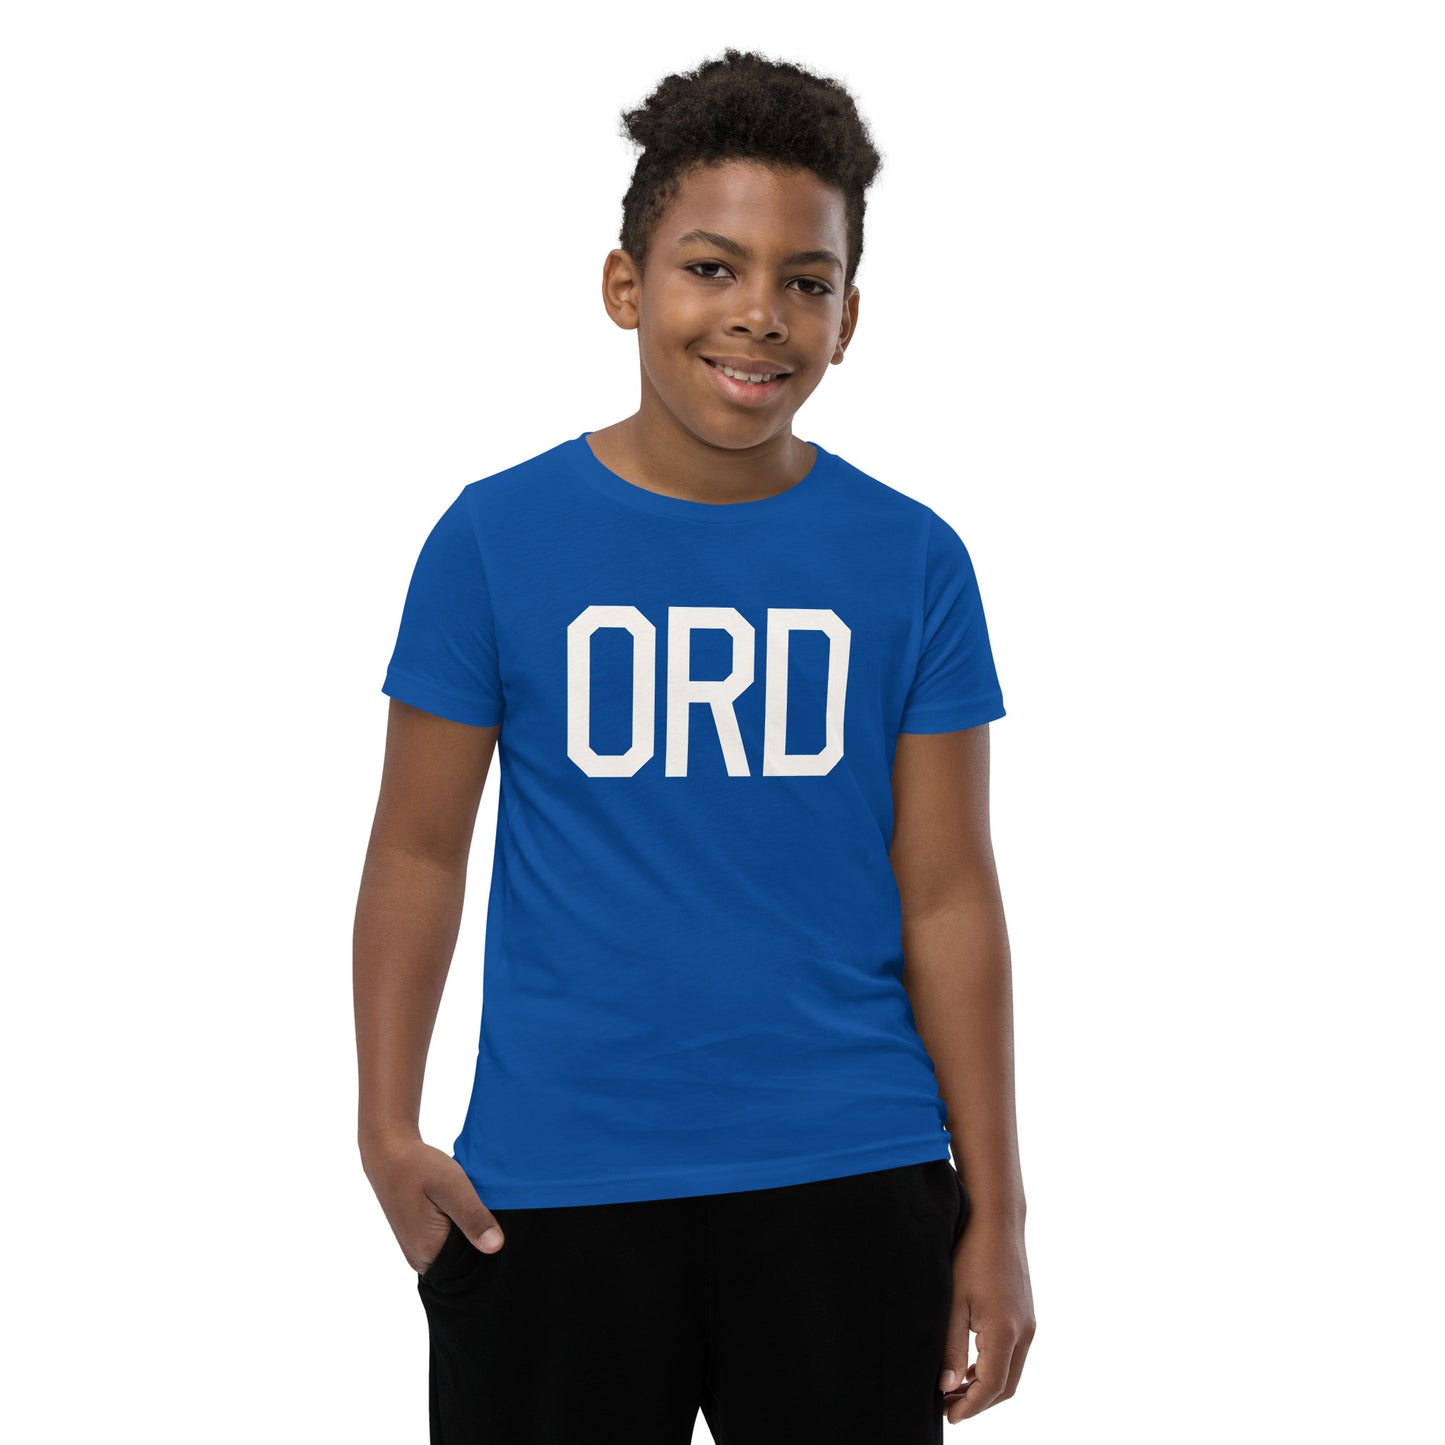 Kid's T-Shirt - White Graphic • ORD Chicago • YHM Designs - Image 11